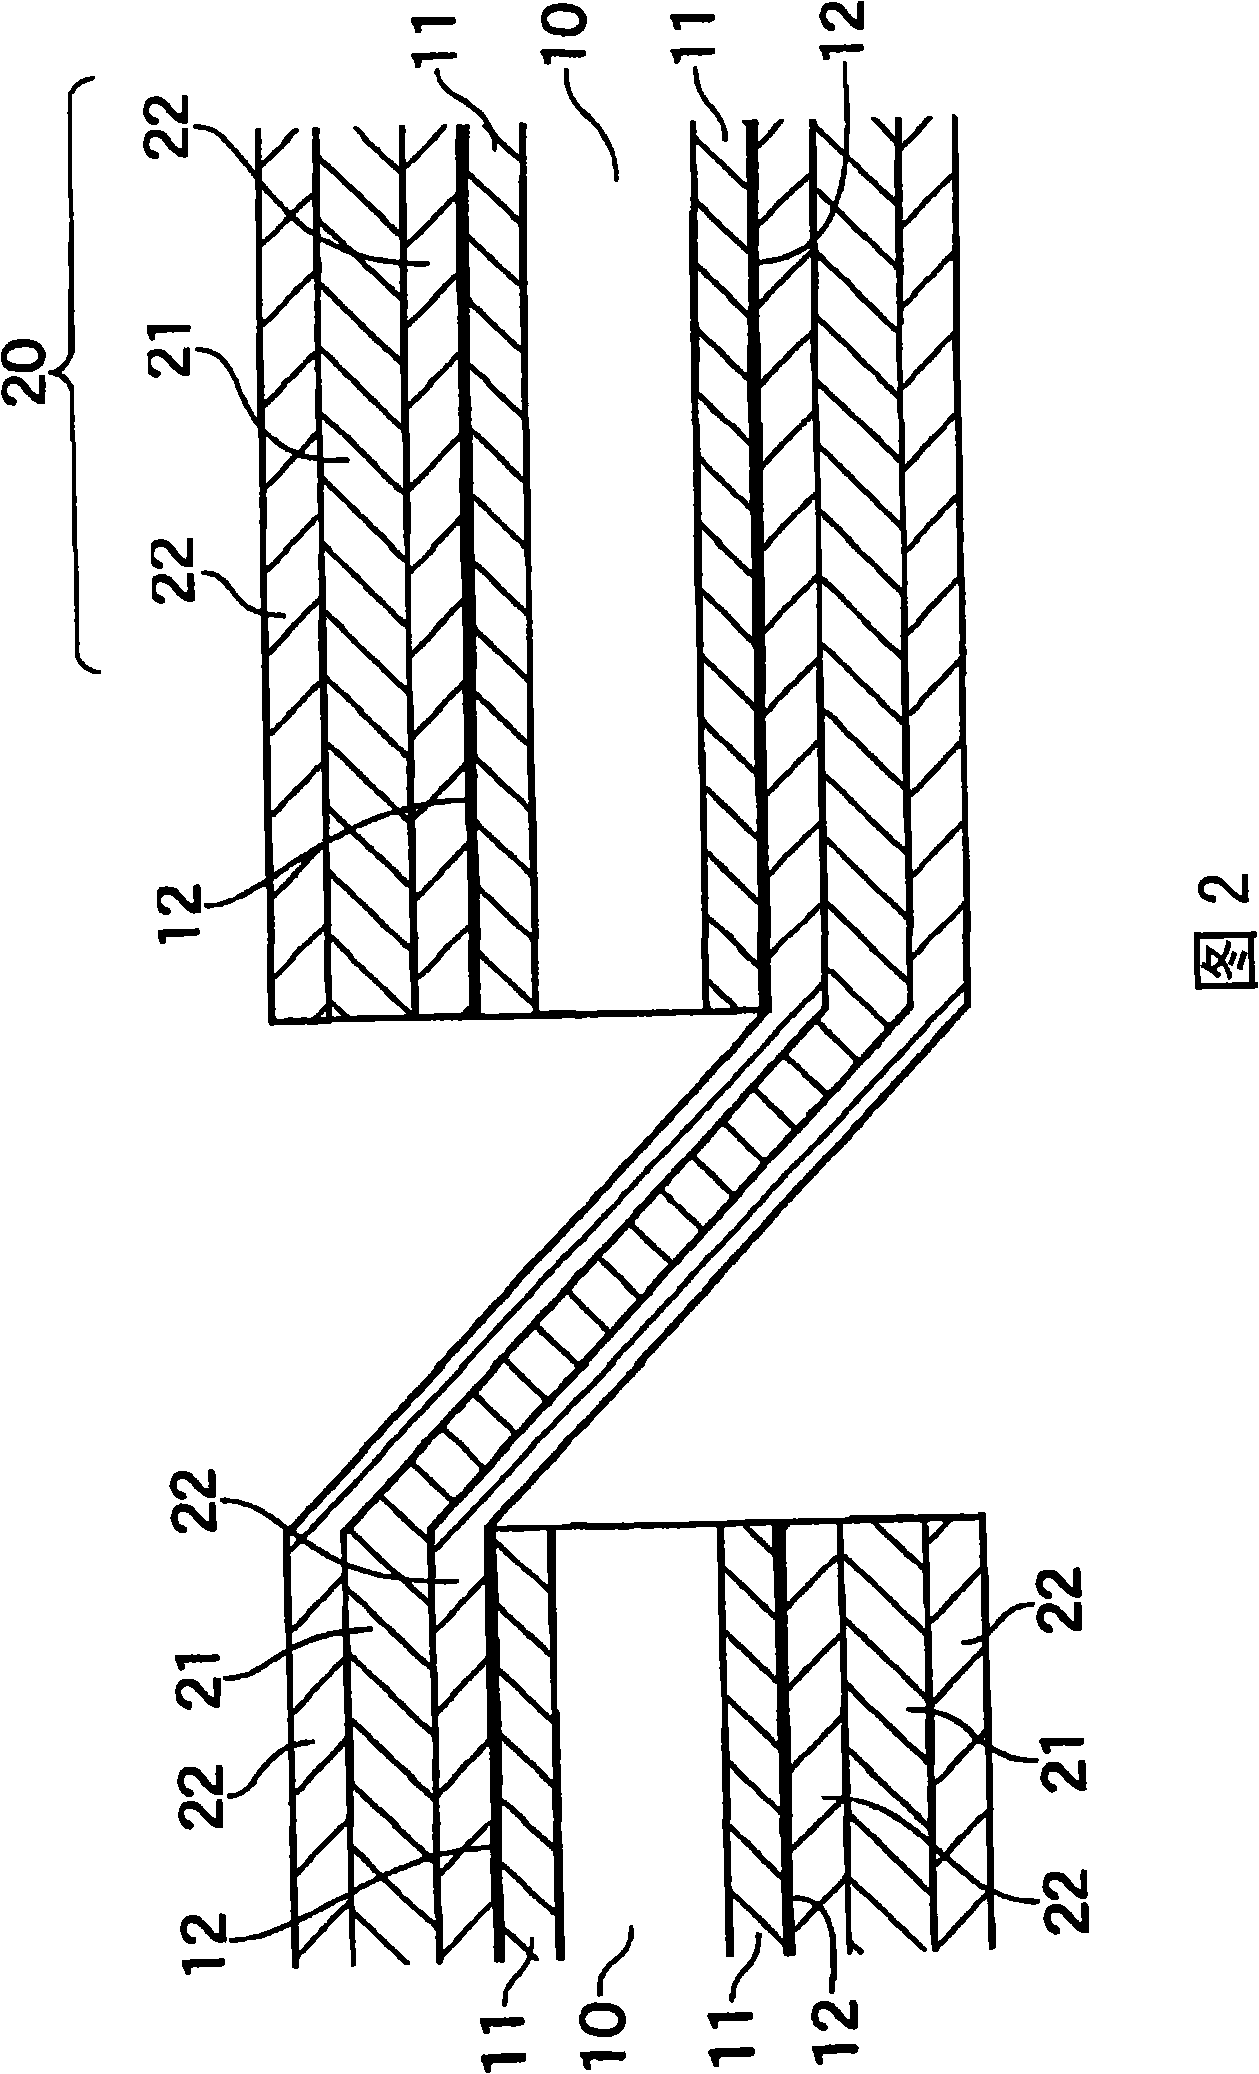 Method for soldering interconnectors to photovoltaic cells